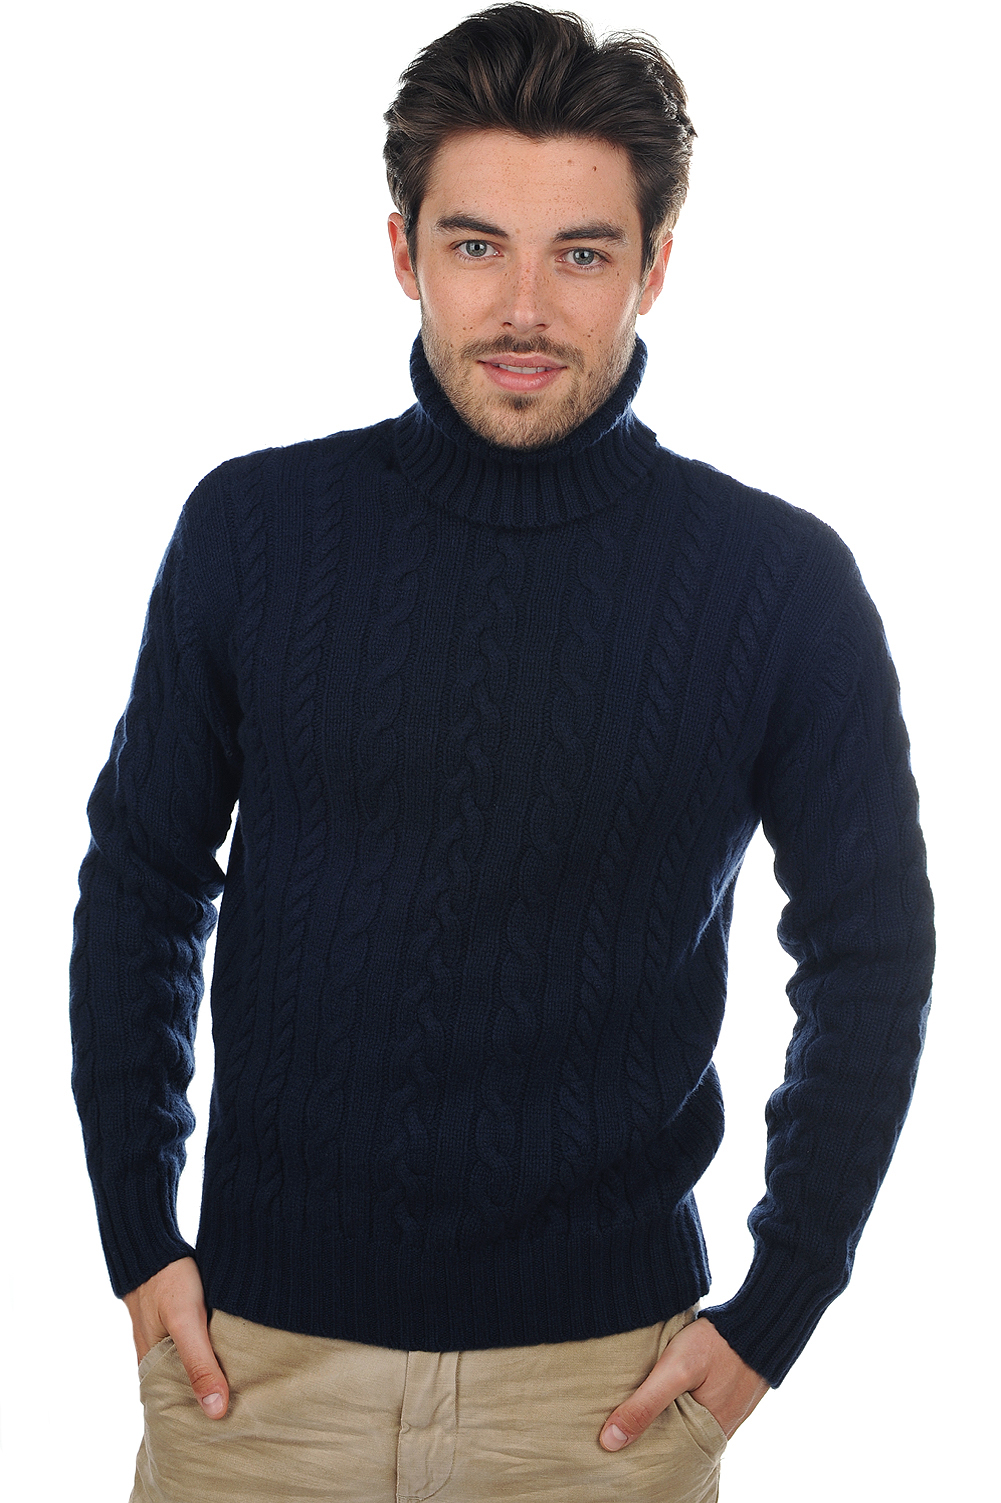 Cachemire pull homme lucas marine fonce xl